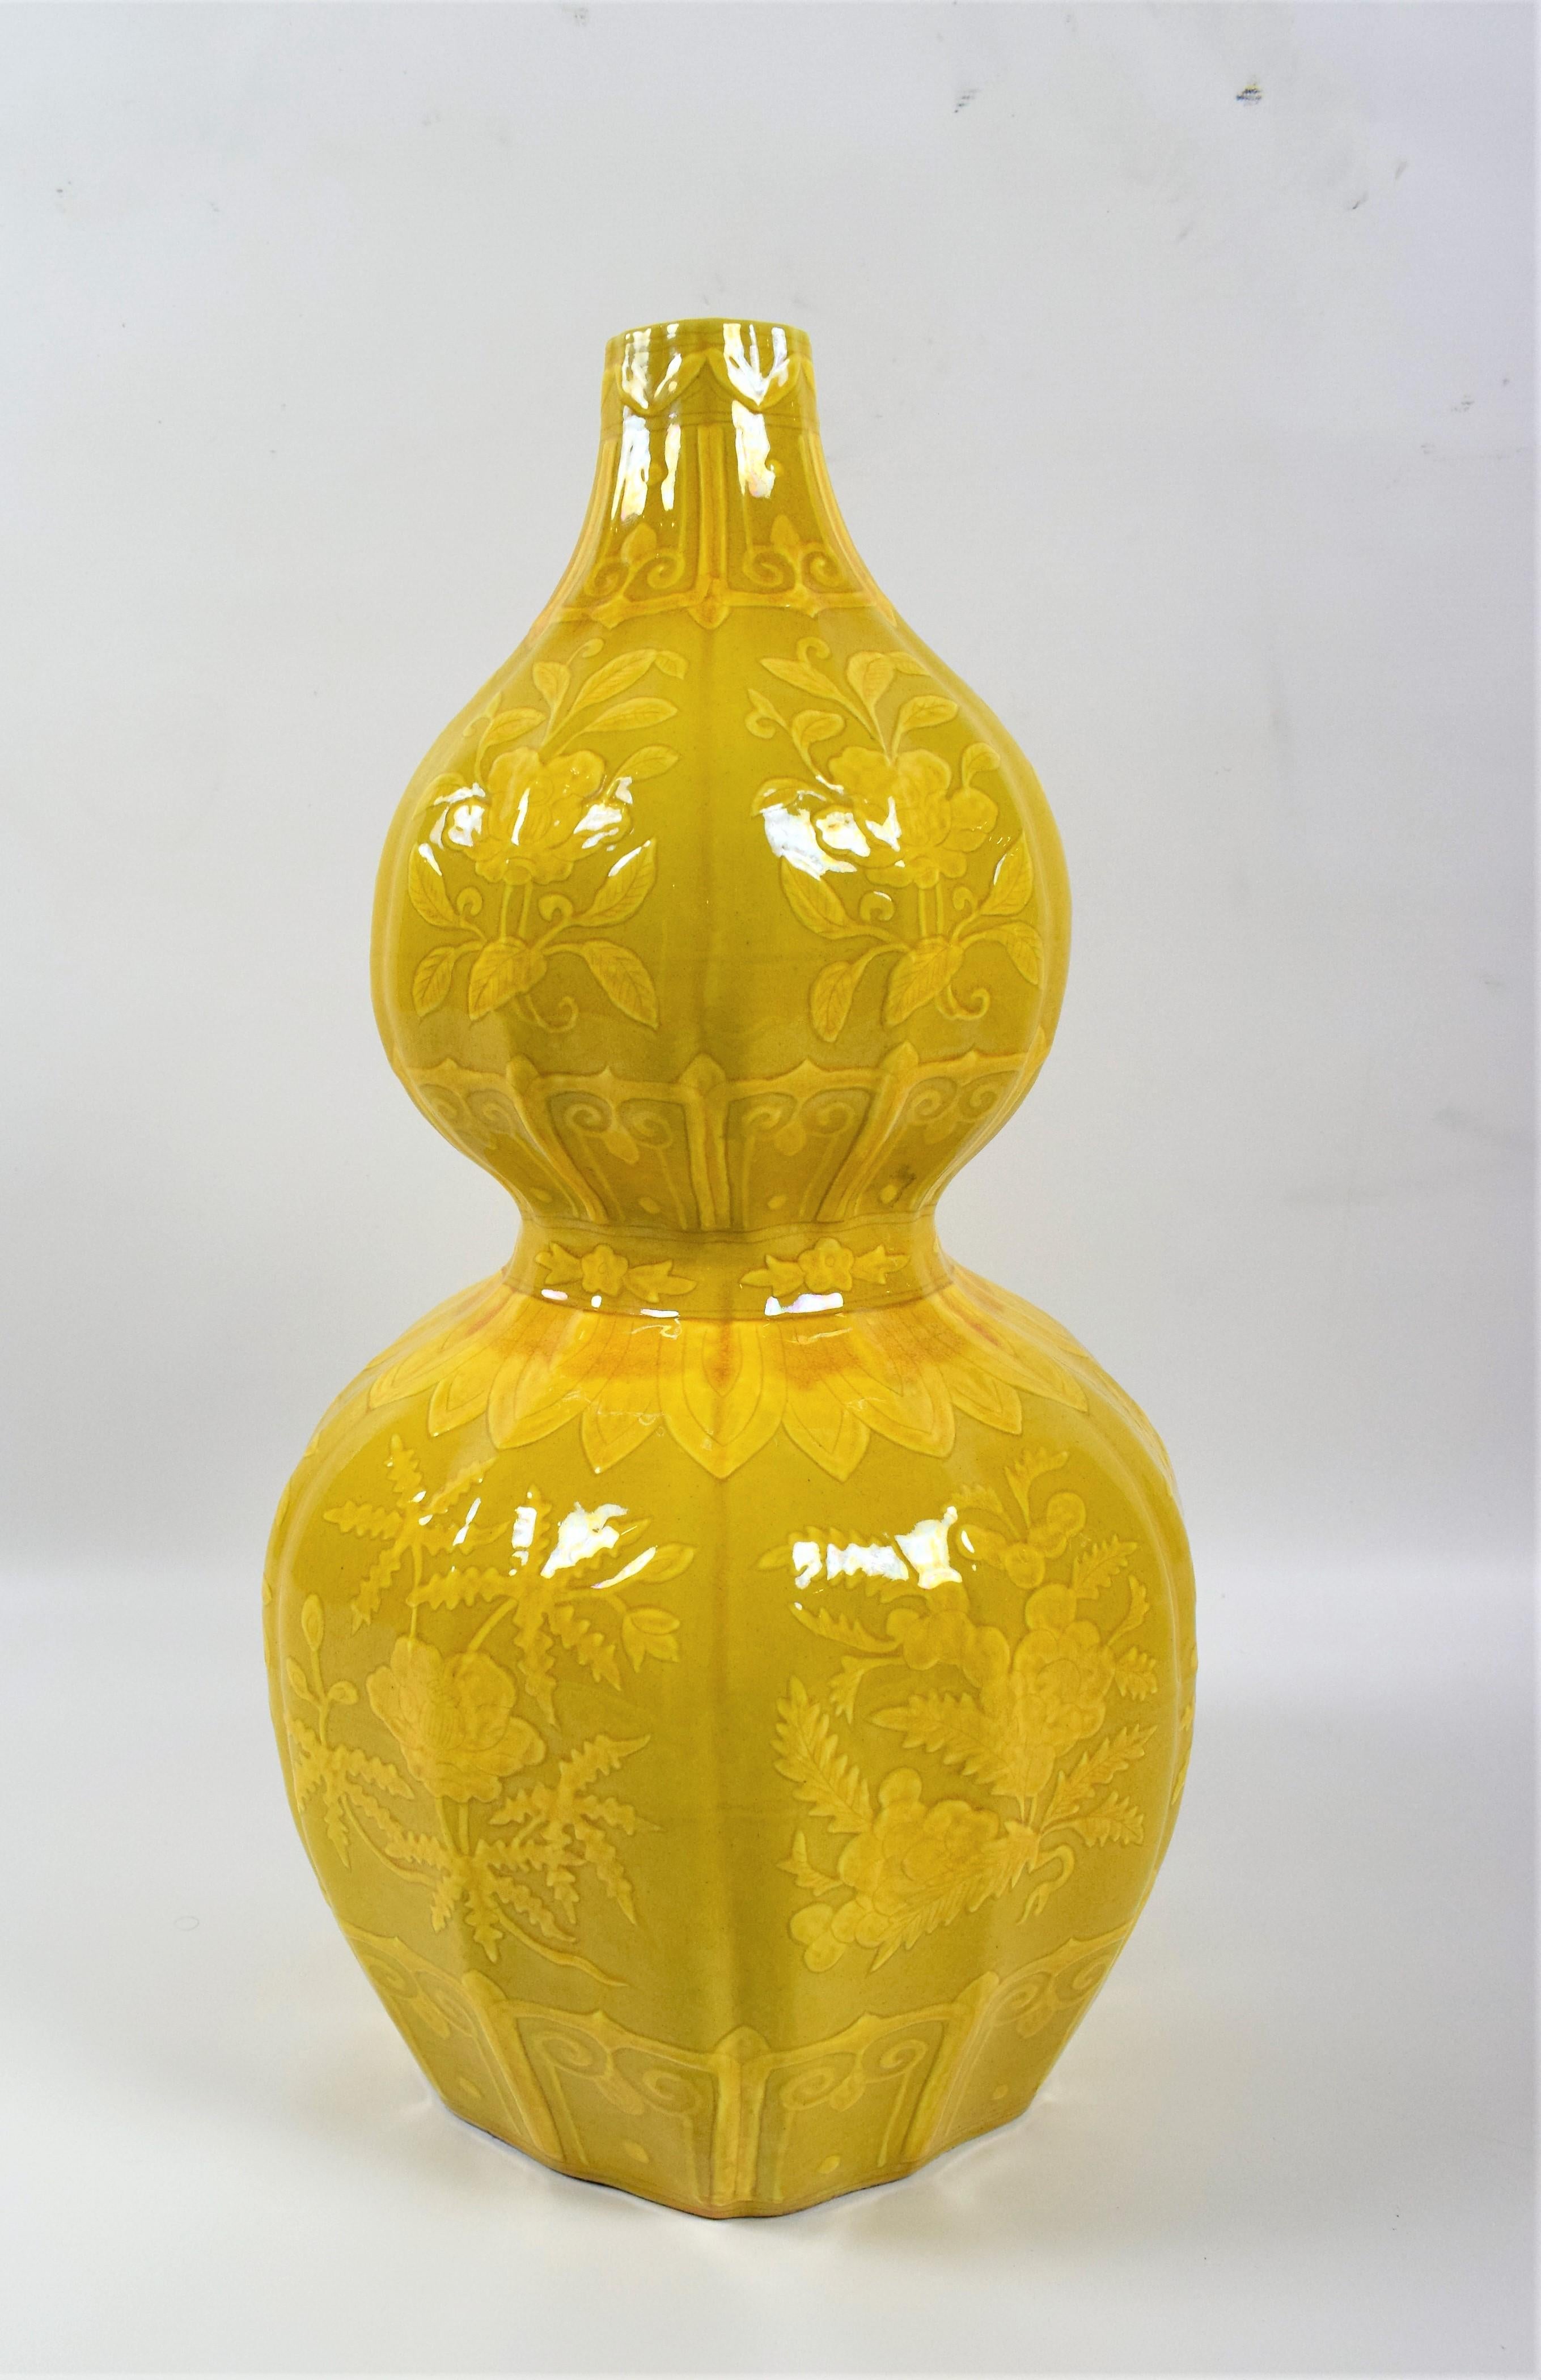 A stunning pair of Asian Chinese porcelain vases, adorned with a beautiful floral motif, featuring a vibrant yellow color scheme. These vases are designed in the shape of double gourds, symbolizing good fortune and prosperity in Chinese